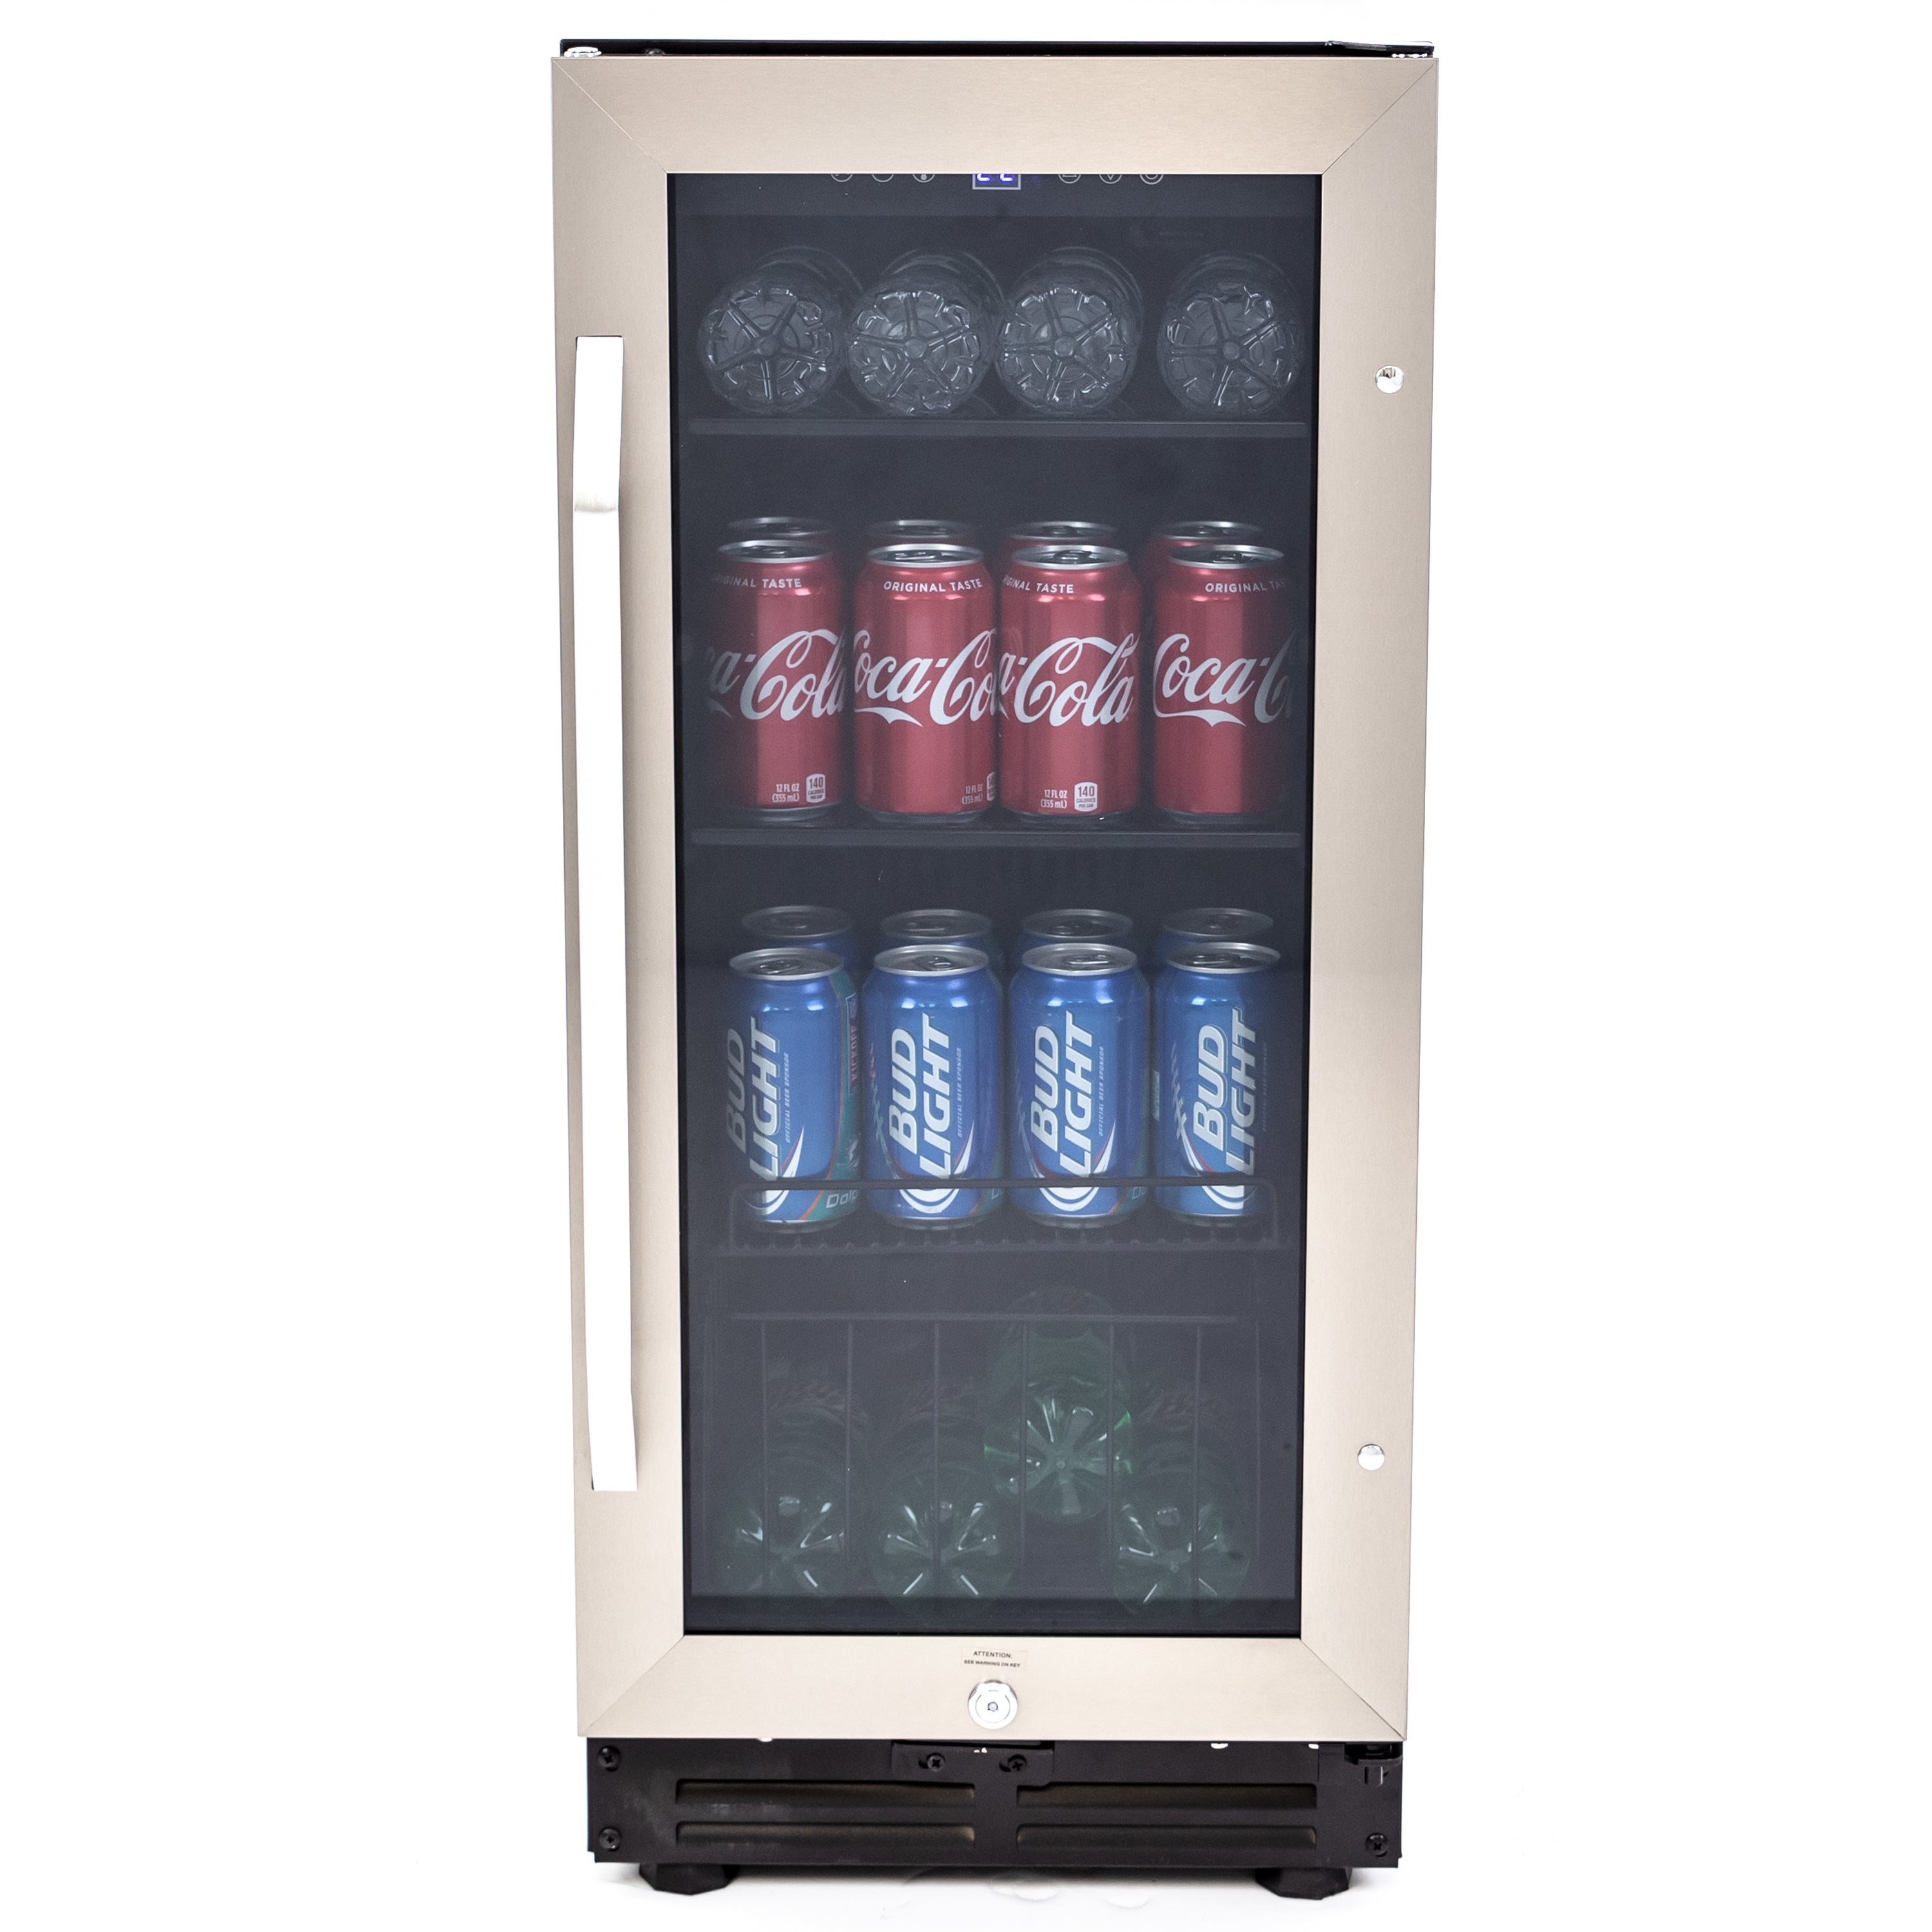 Avanti - BCA3115S3S, Avanti Beverage Center, 72 Can Capacity, in Stainless Steel with Black Cabinet